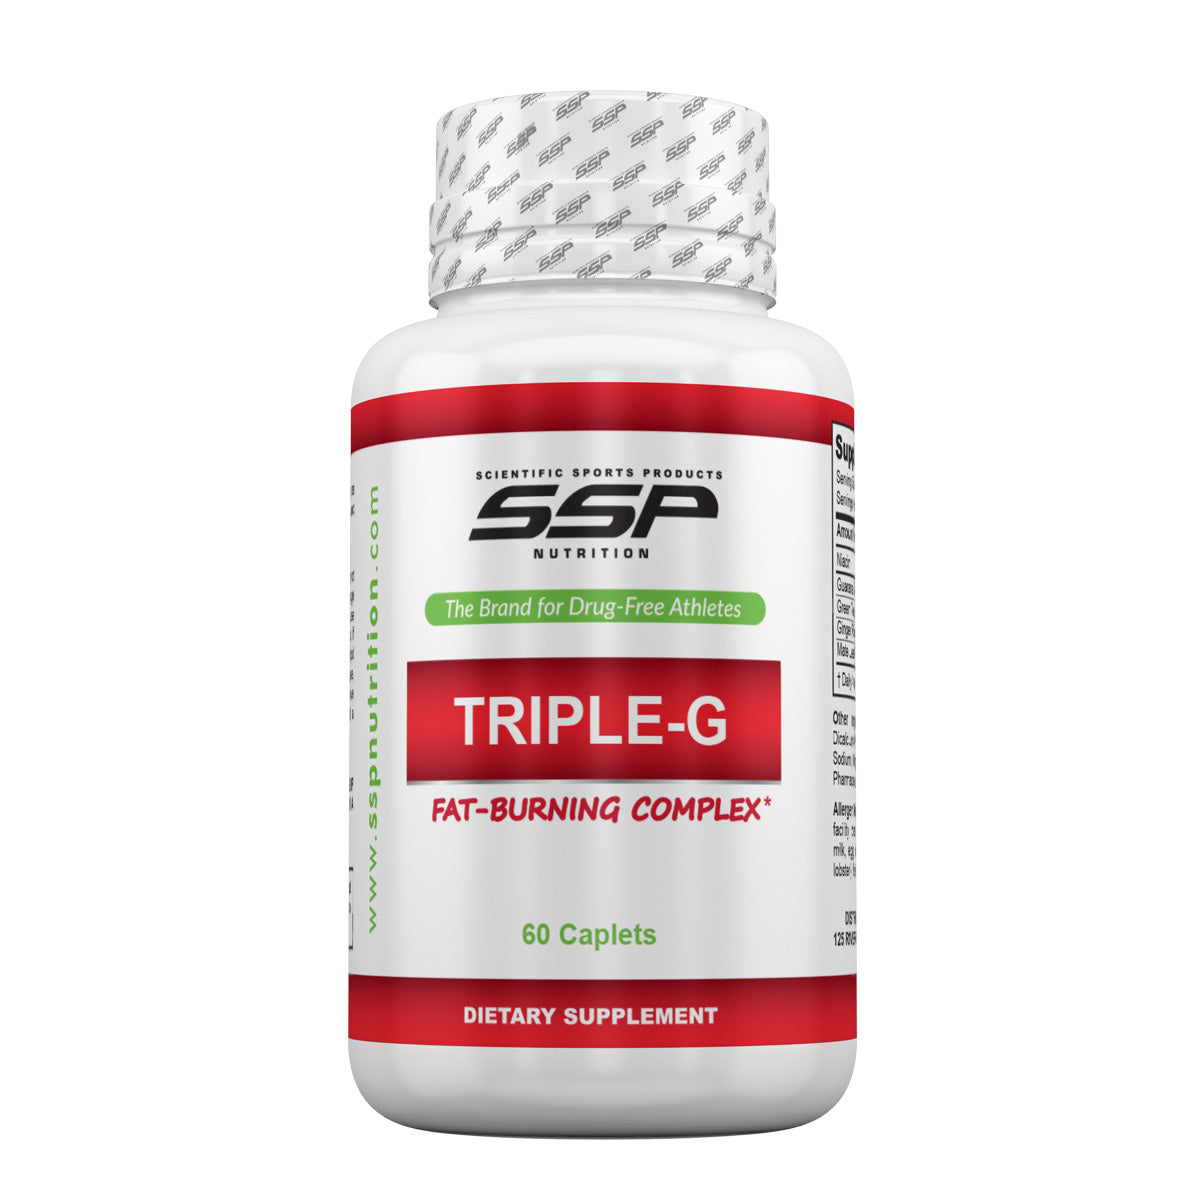 SSP NUTRITION TRIPLE-G WEIGHT LOSS AND FAT BURNING SOLUTION